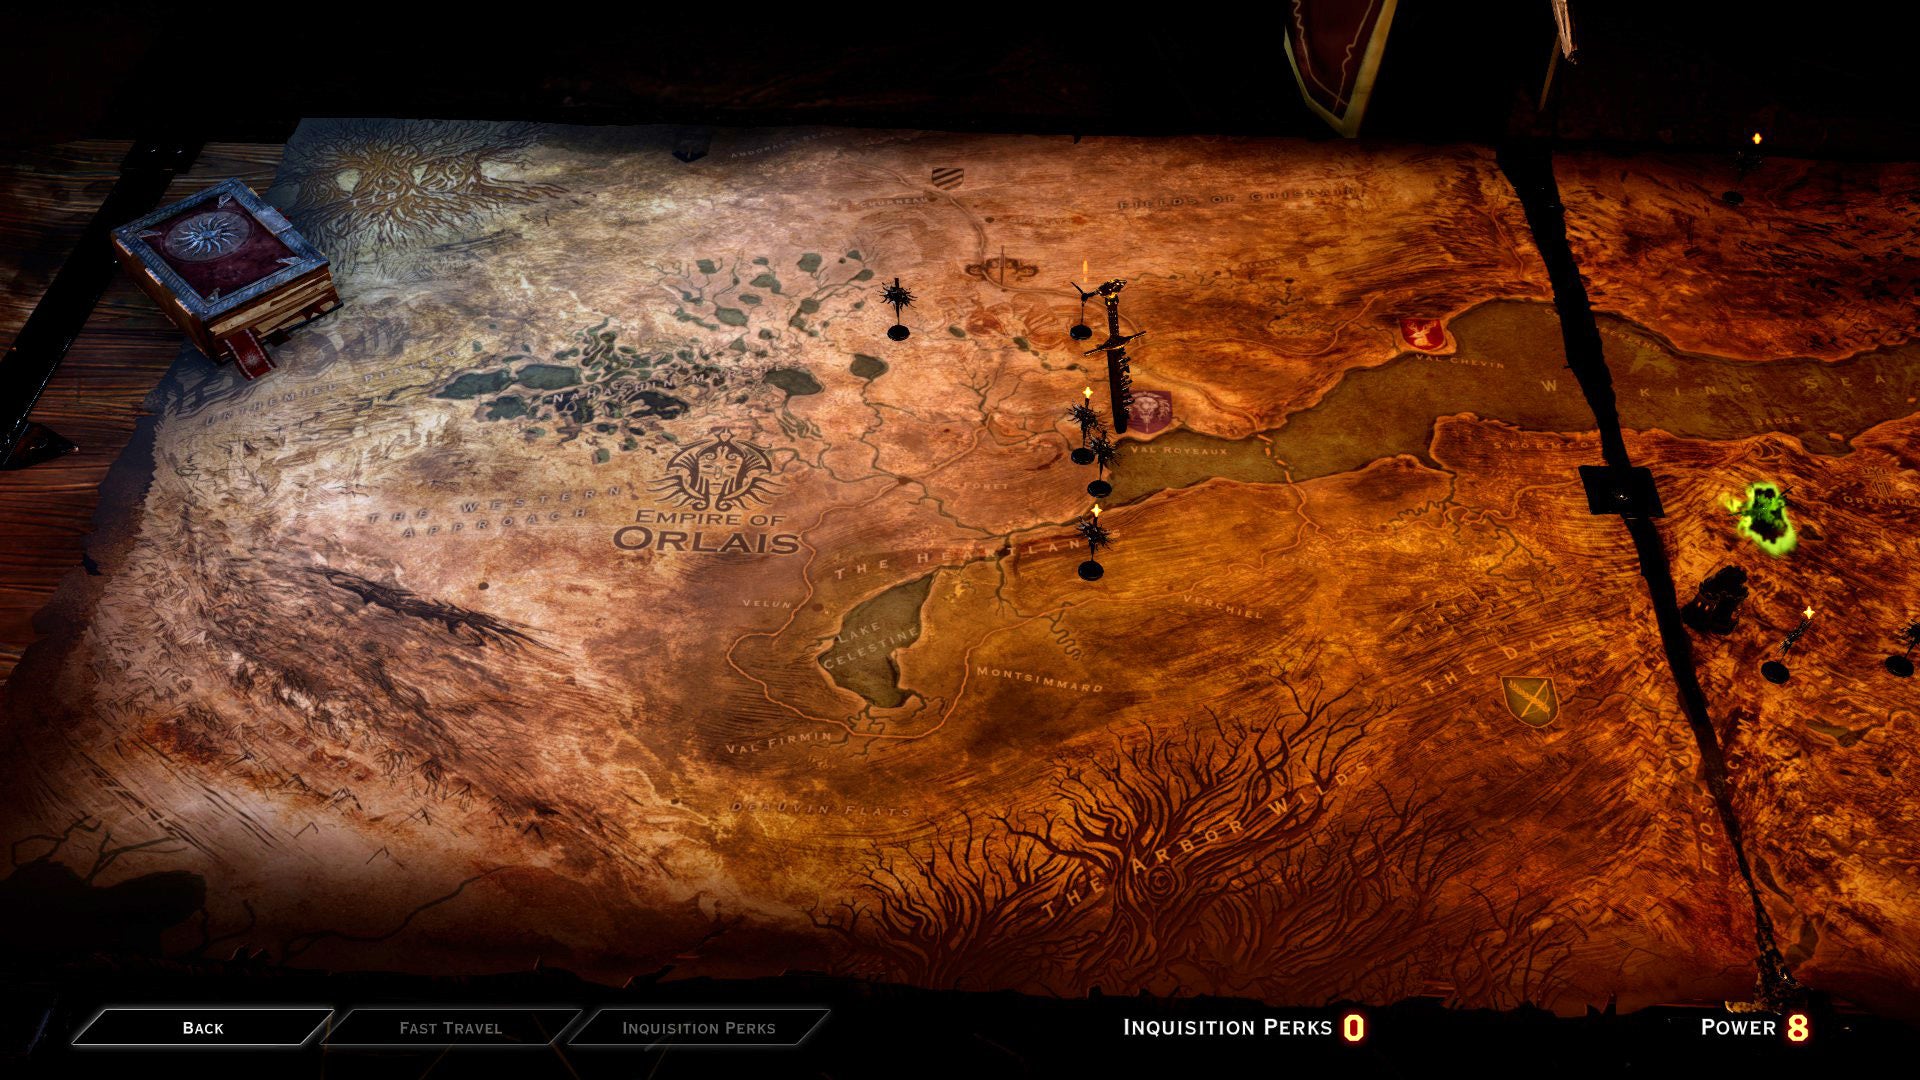 A screenshot of the War Table map in Dragon Age: Inquisition, showing the game's map of Thedas spread out on the table before you.